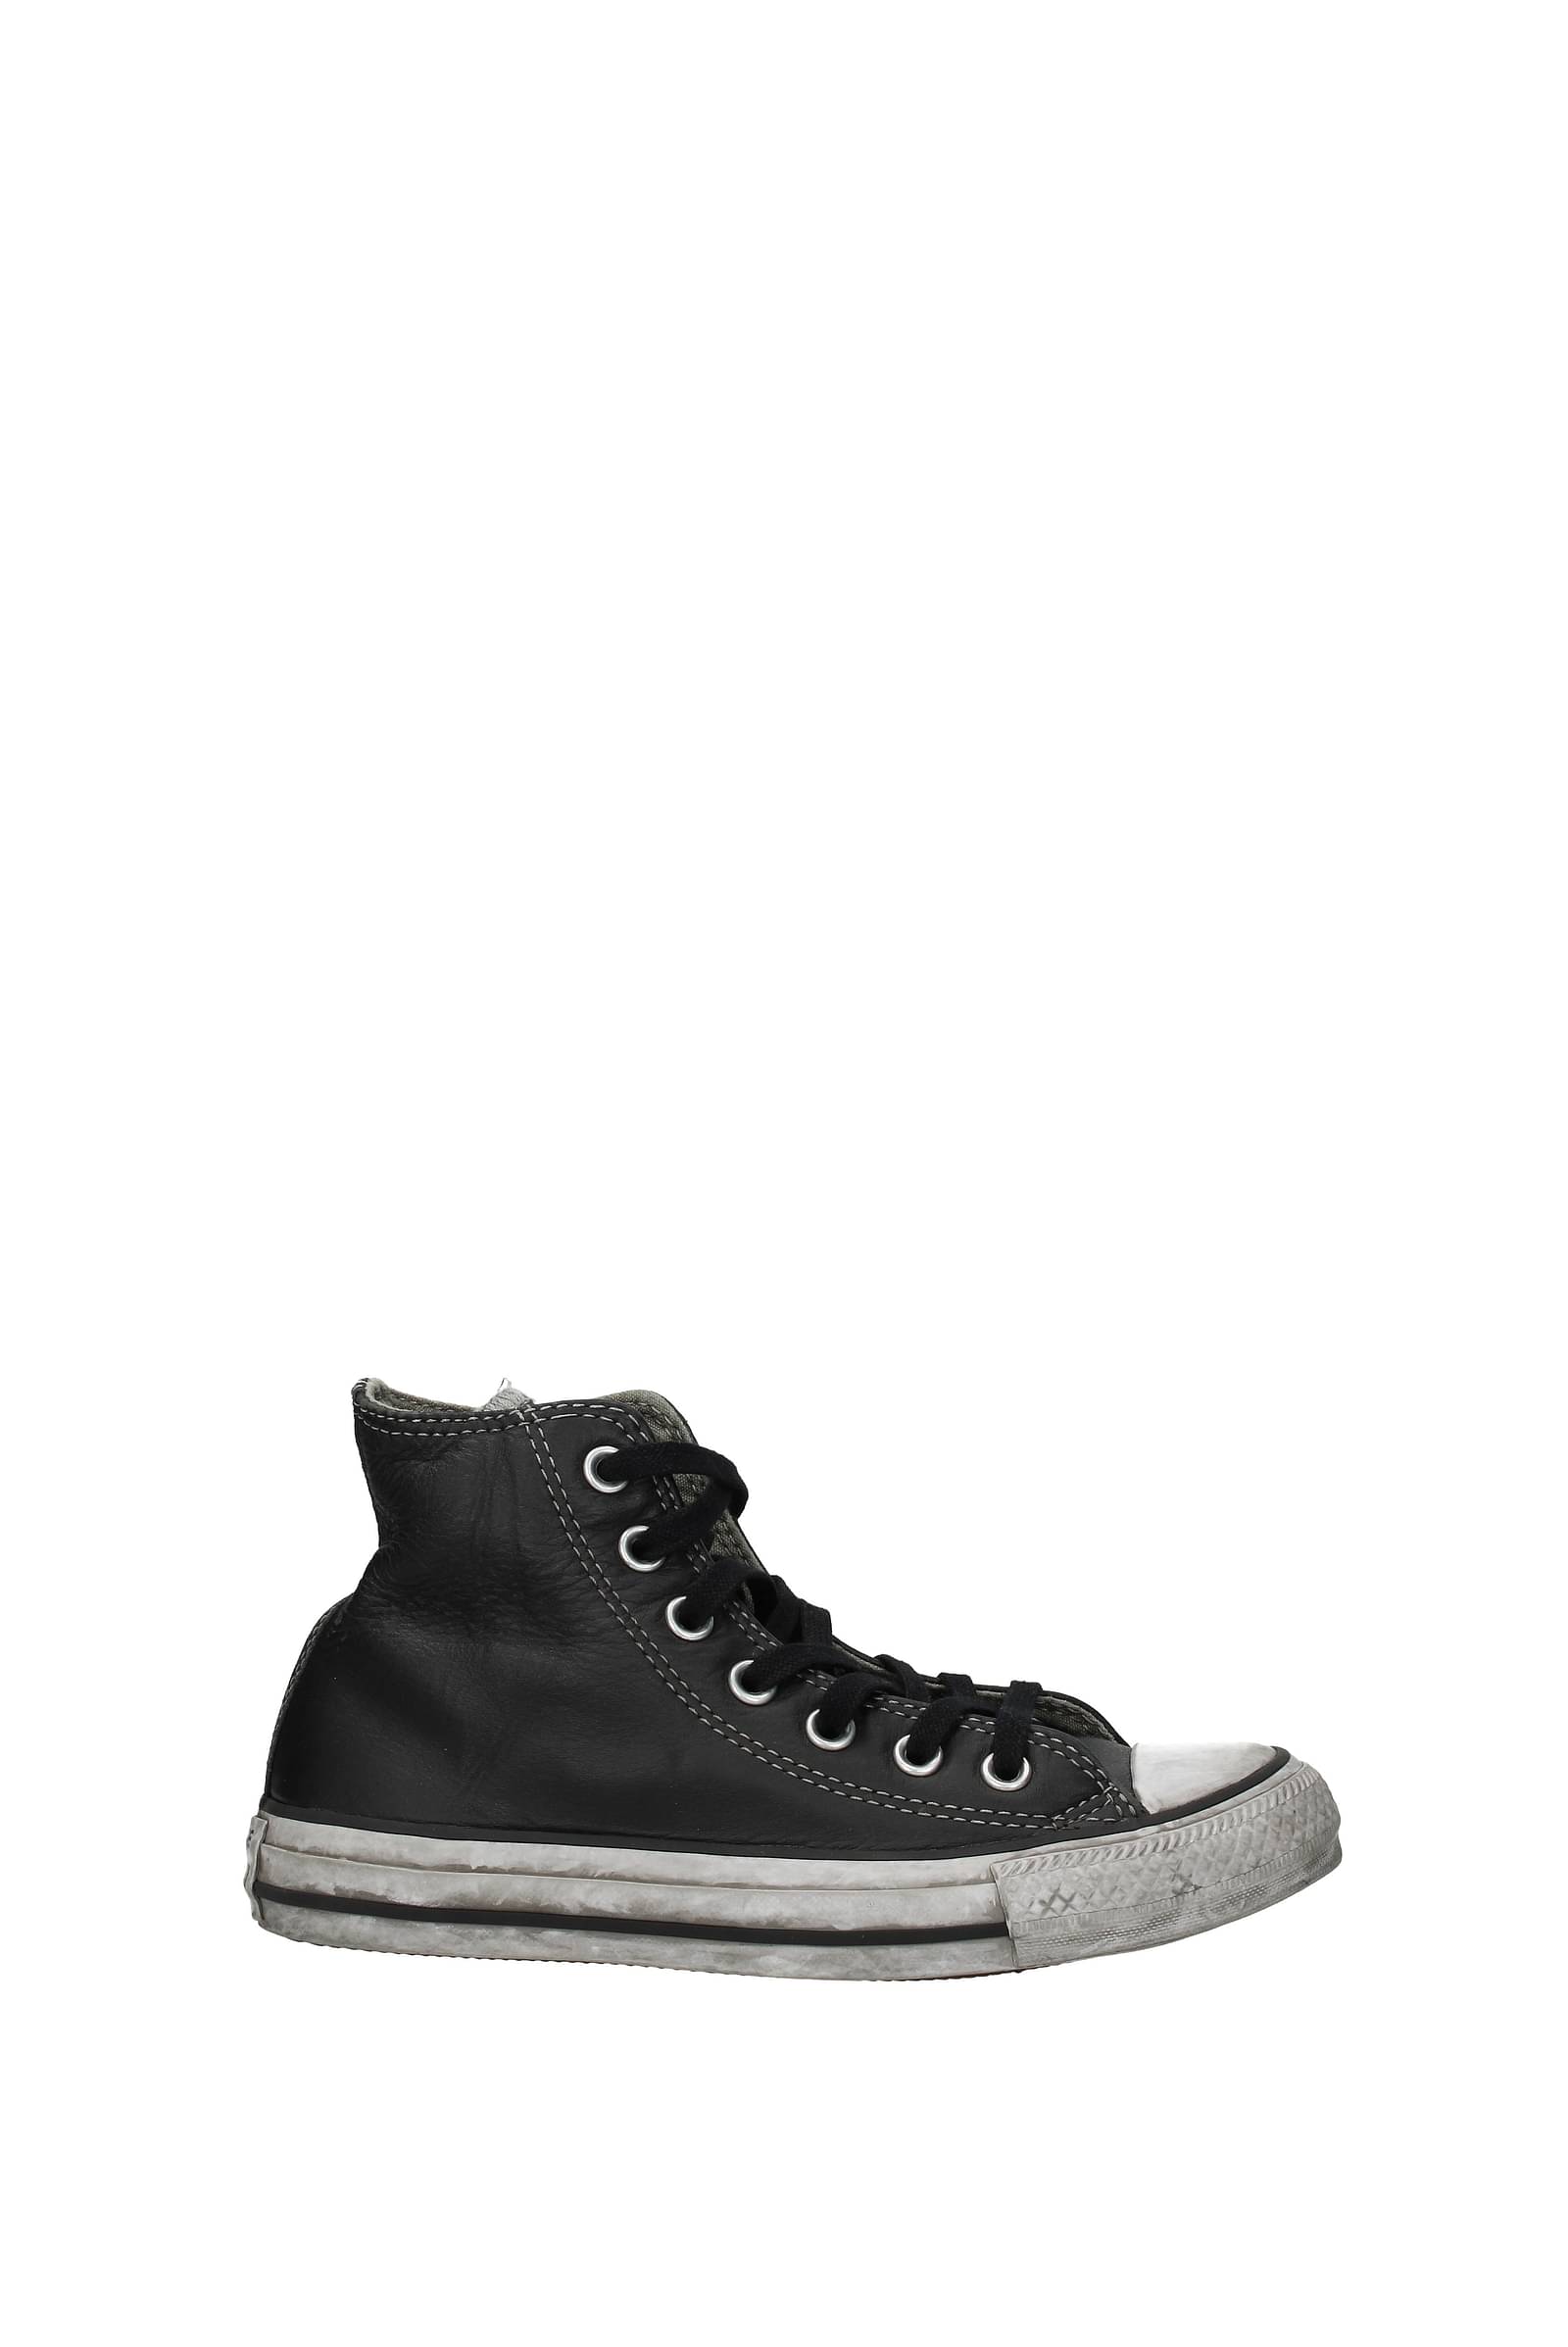 converse bianche basse outlet 60